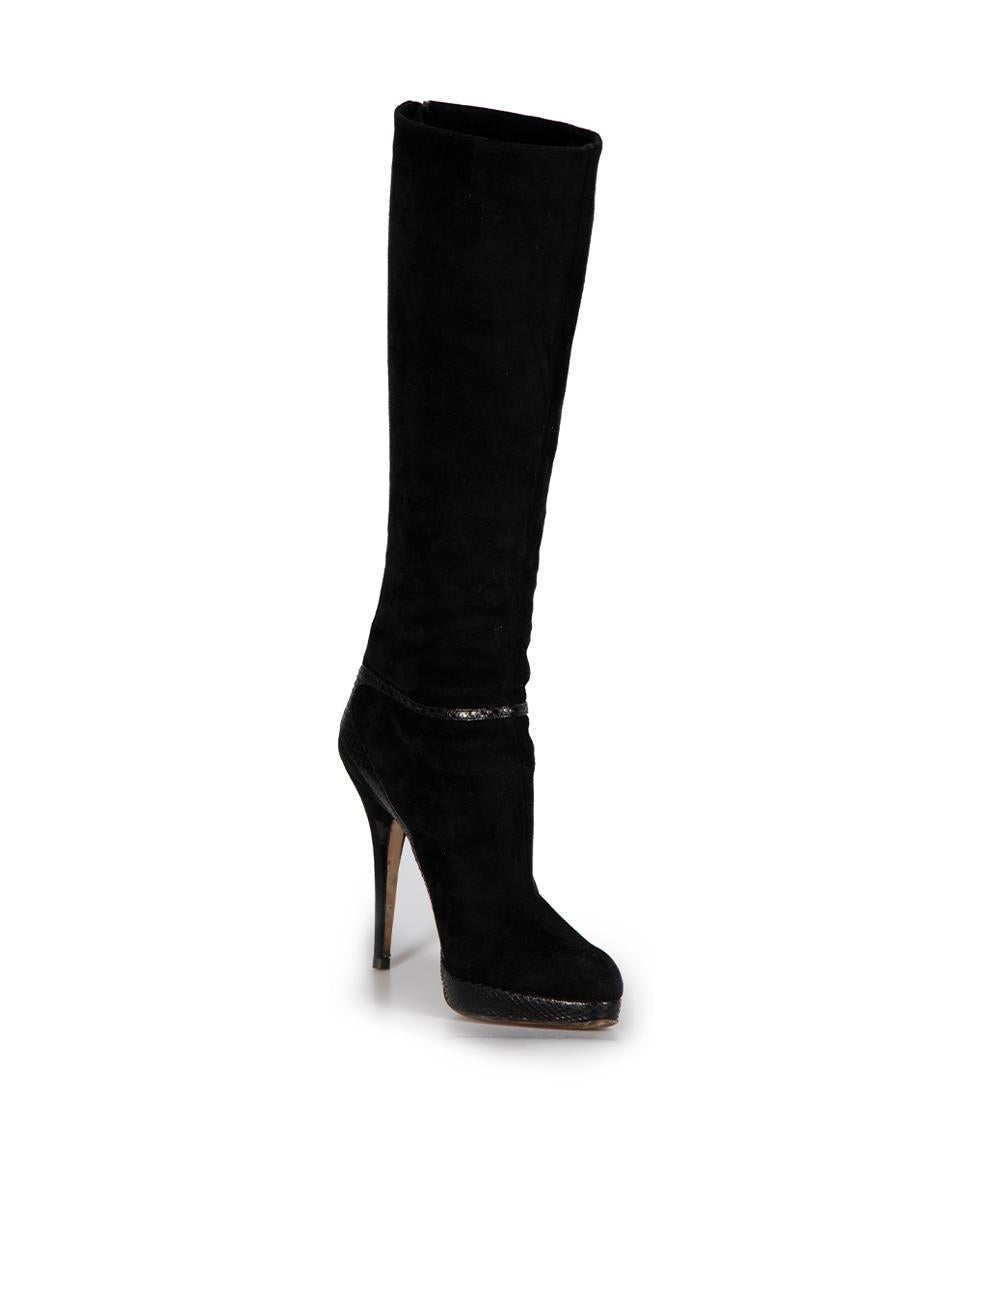 CONDITION is Good. Minor wear to boots is evident. Light wear to overall suede and small indentations to the back of heels on this used Jimmy Choo designer resale item. Original dust bag included.



Details


Black

Suede

Knee high boots

High